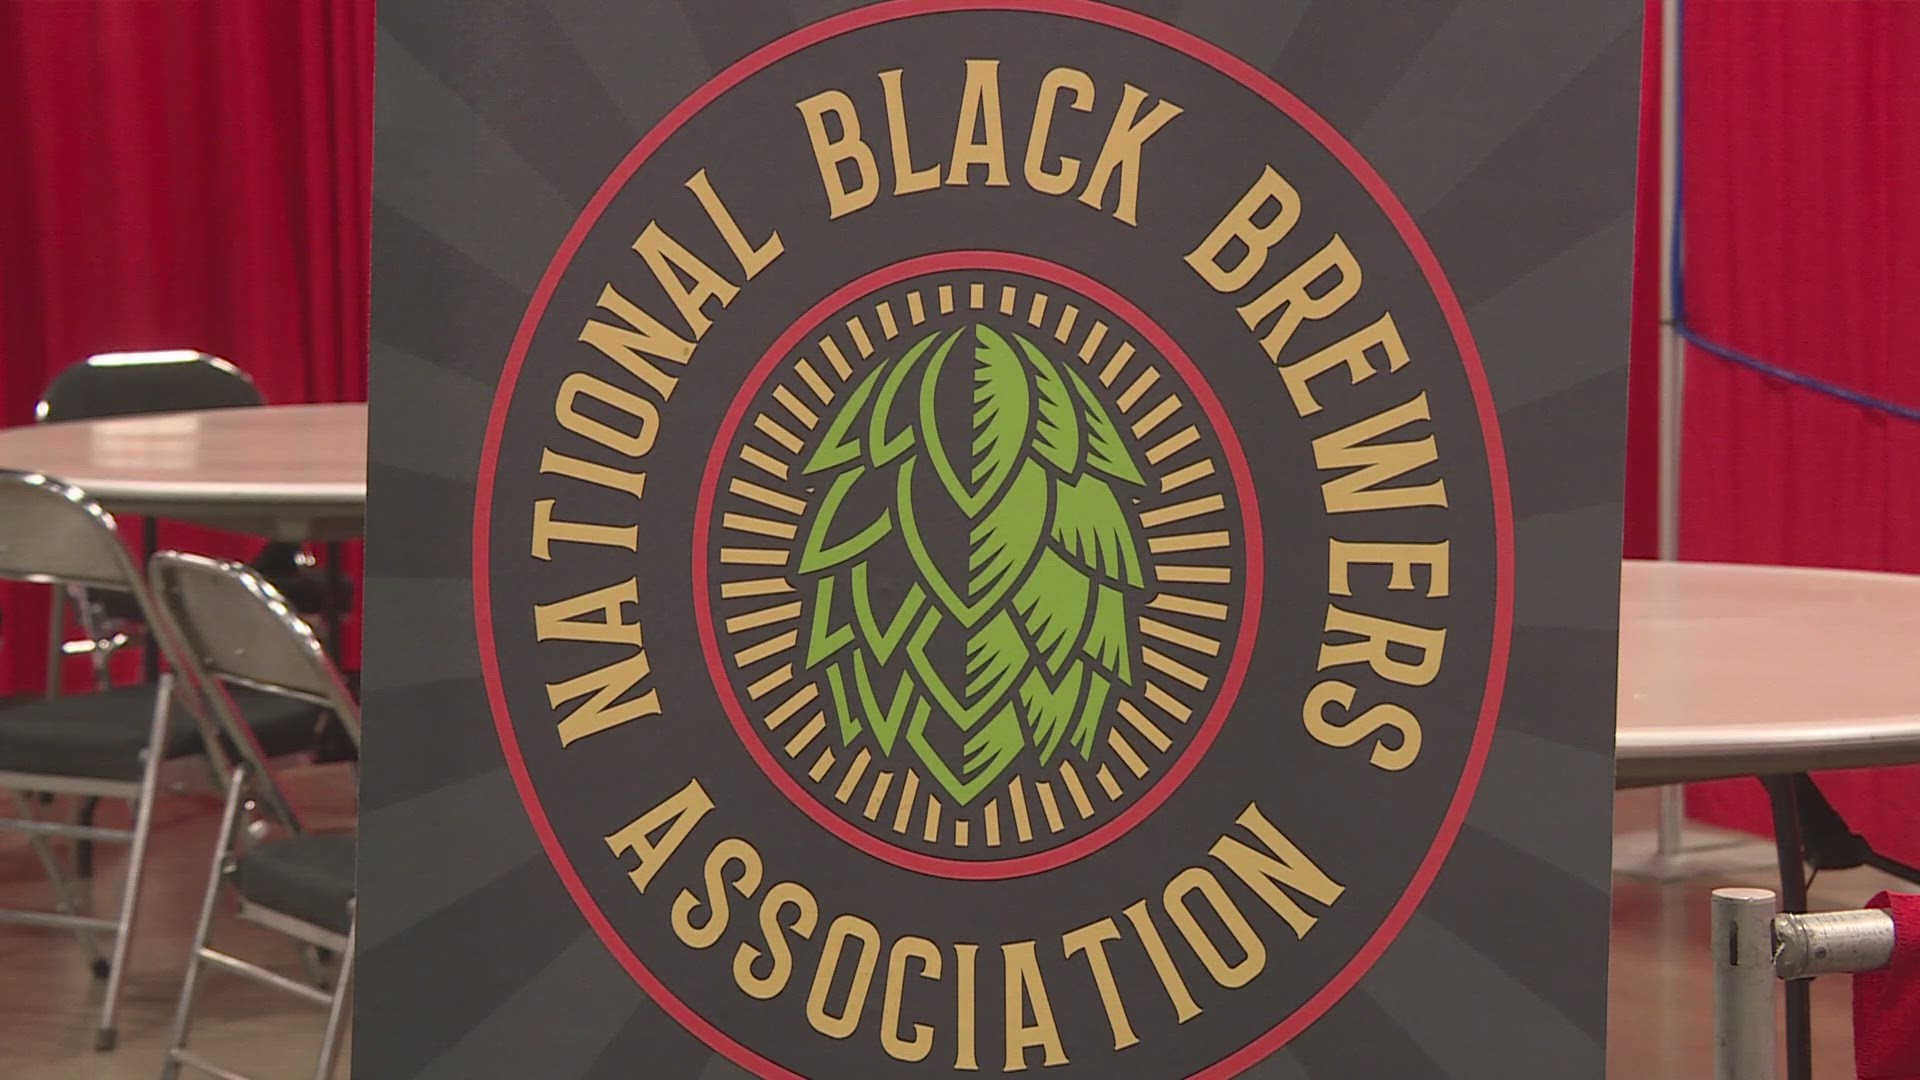 This year marks the first time the Great American Beer Festival will highlight Black brewers in an effort to encourage more Black and brown owners in Colorado.